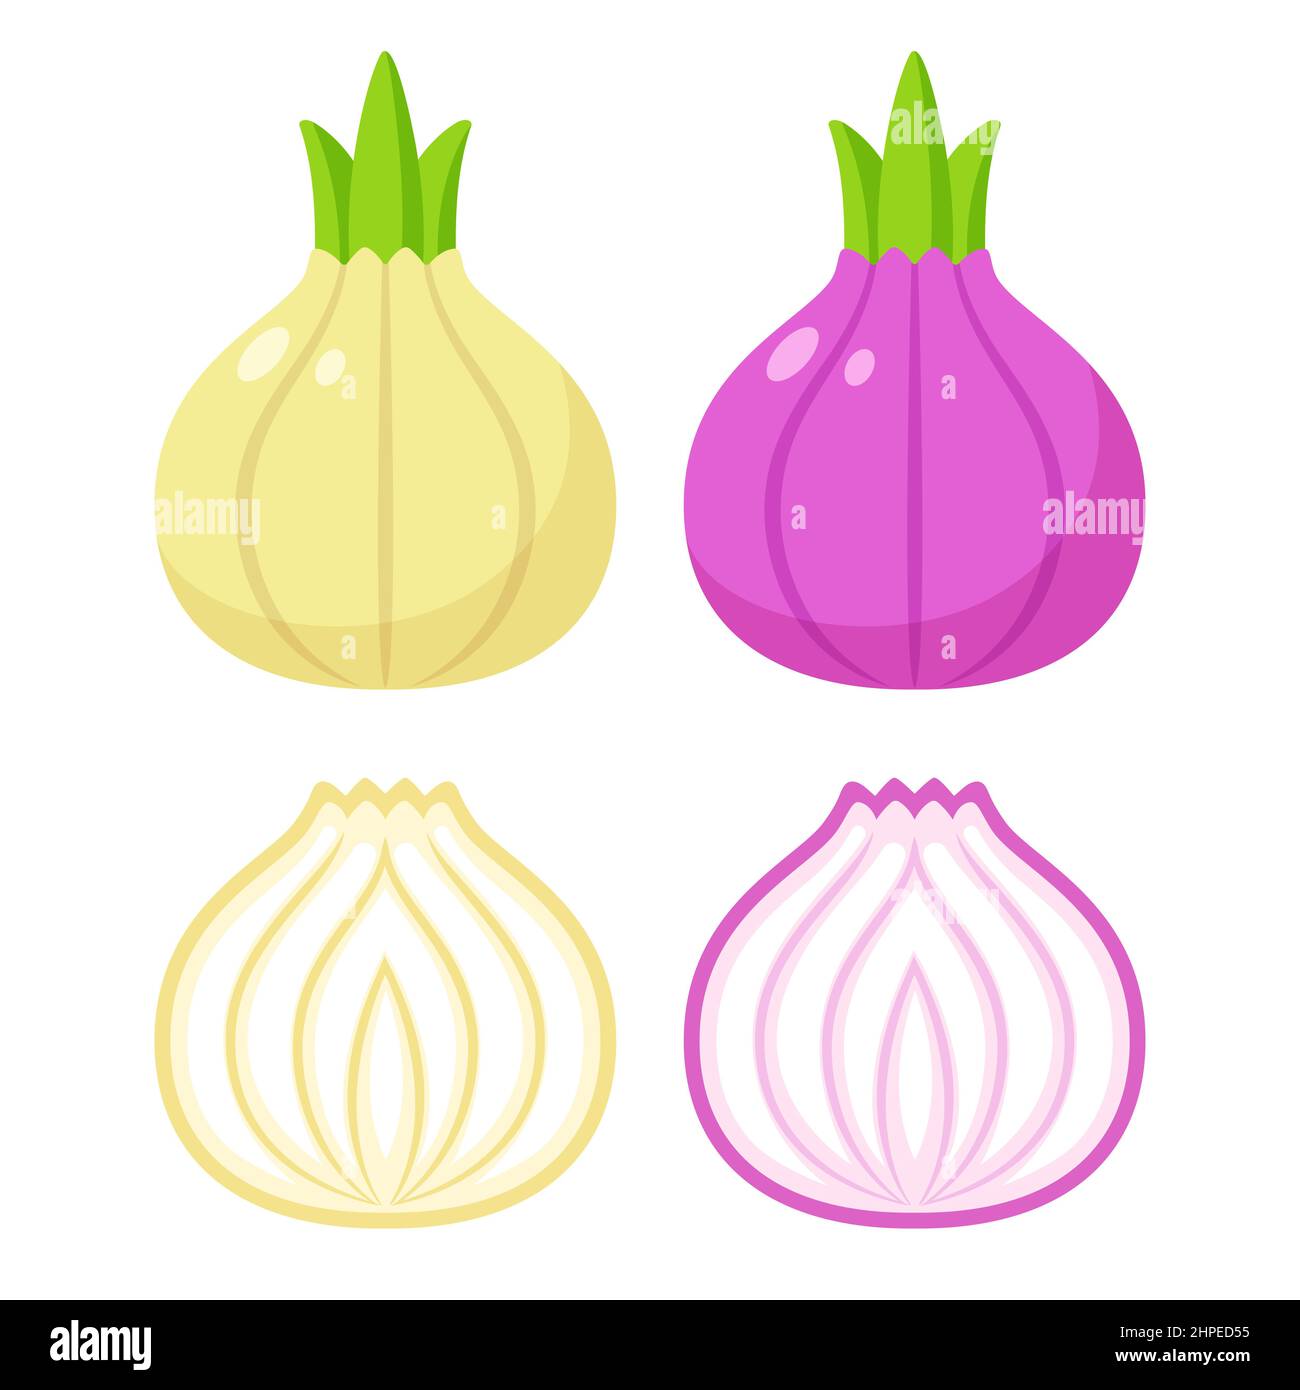 Cartoon white and red onion illustration set. Cute onion bulbs with cross section cut. Isolated vector clip art. Stock Vector